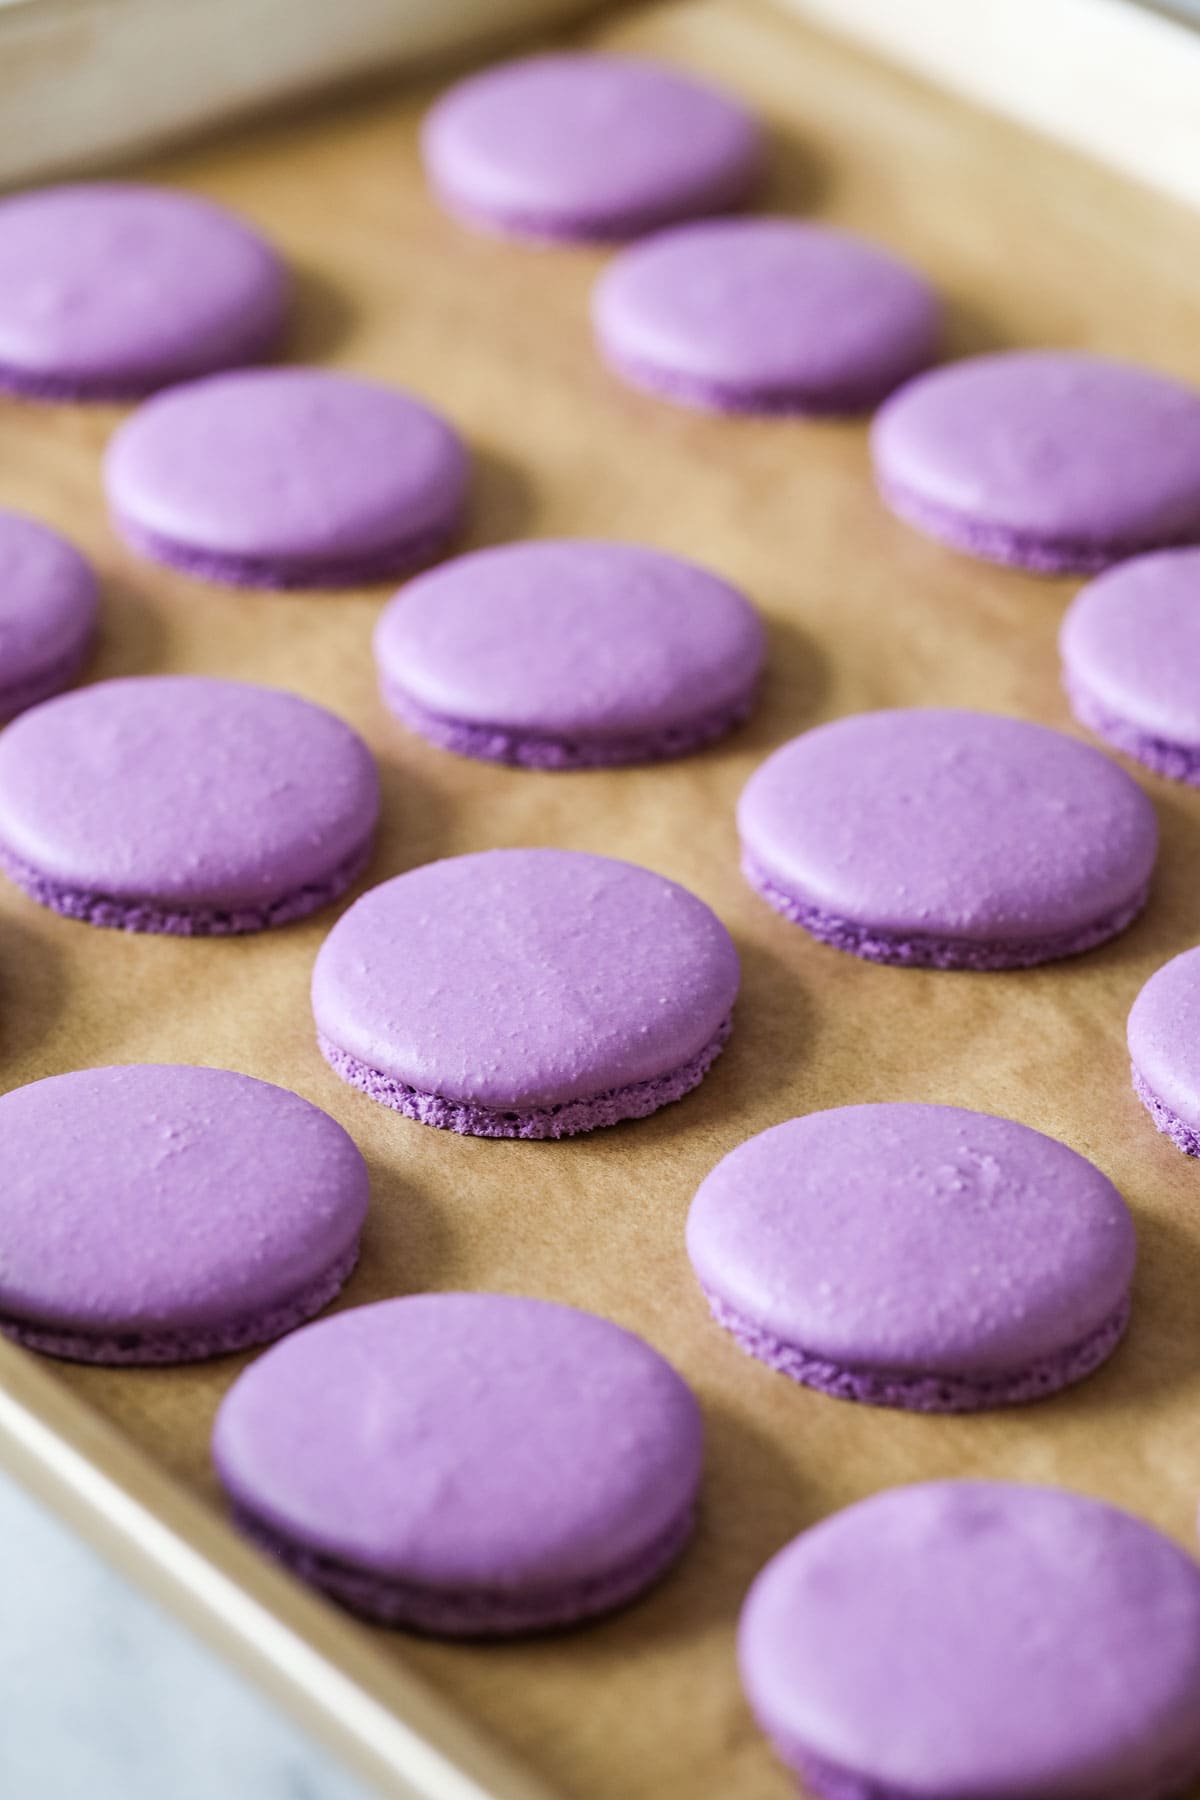 Freshly baked purple macaron shells on a parchment paper lined baking sheet